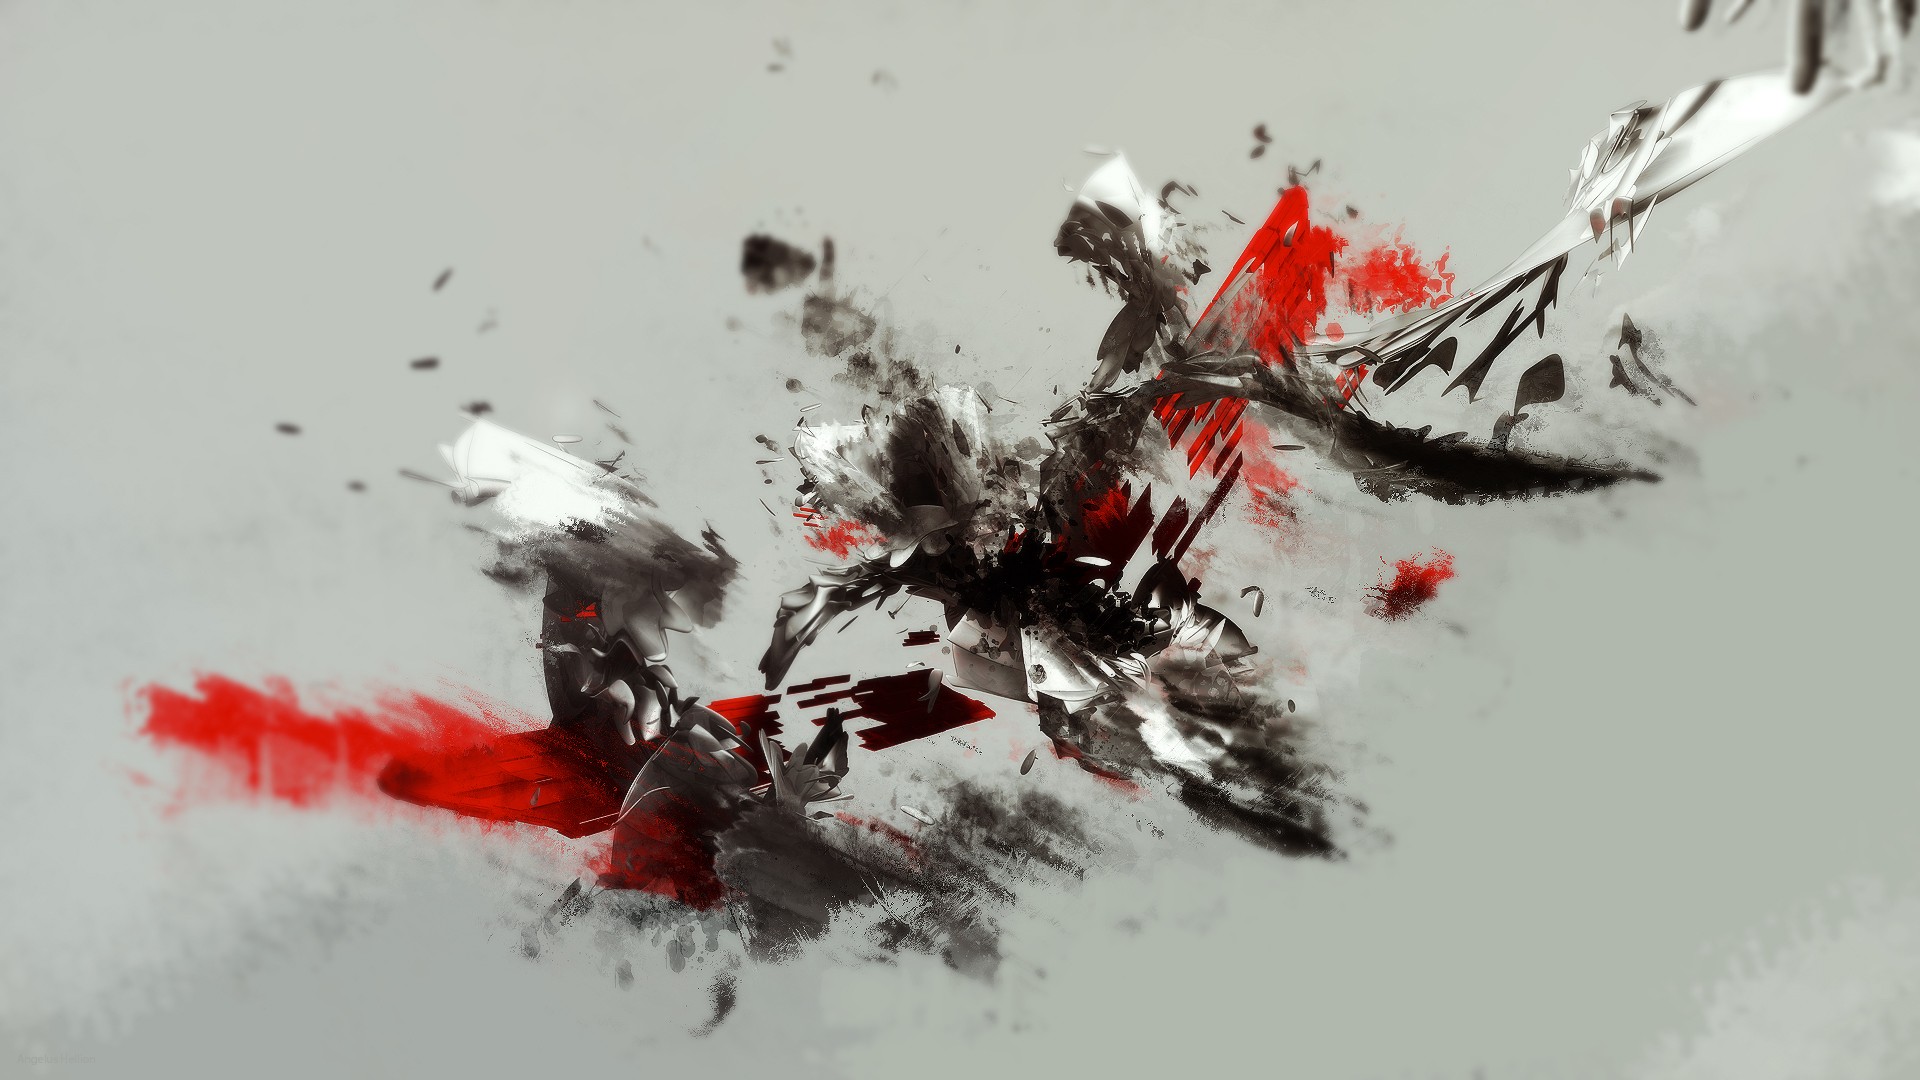 General 1920x1080 digital art simple background selective coloring abstract